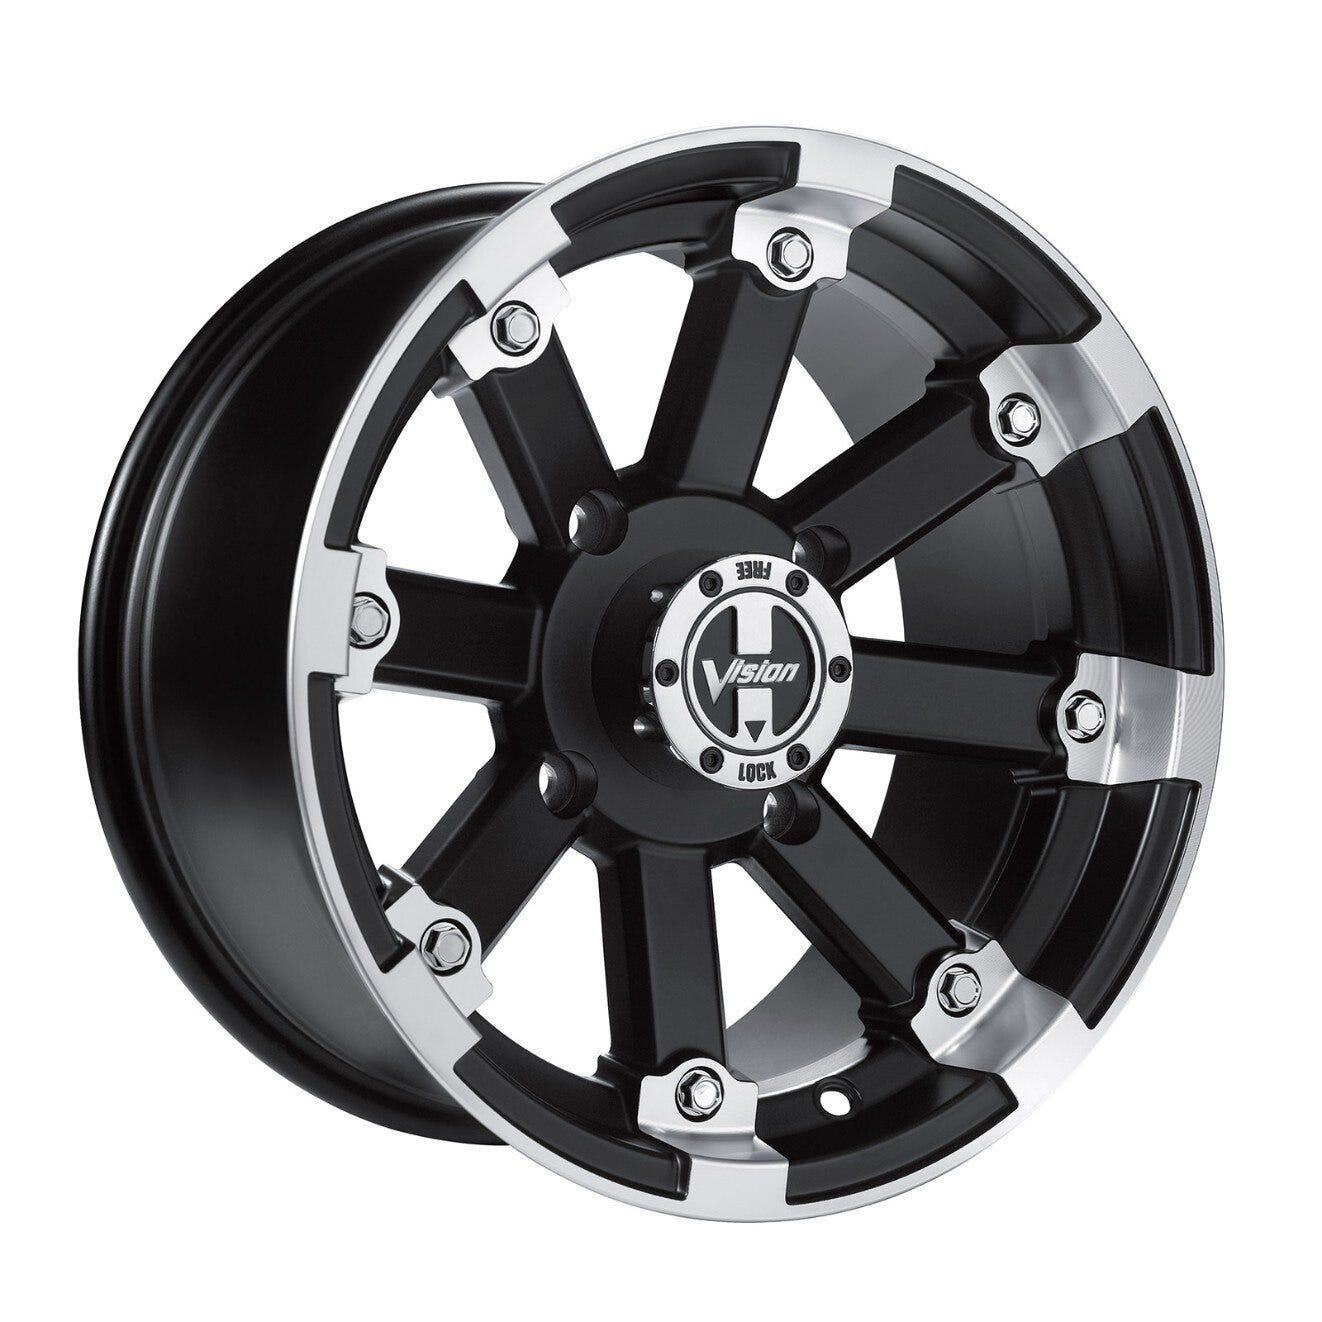 Lockout 393 14" Rim by Vision - Rear